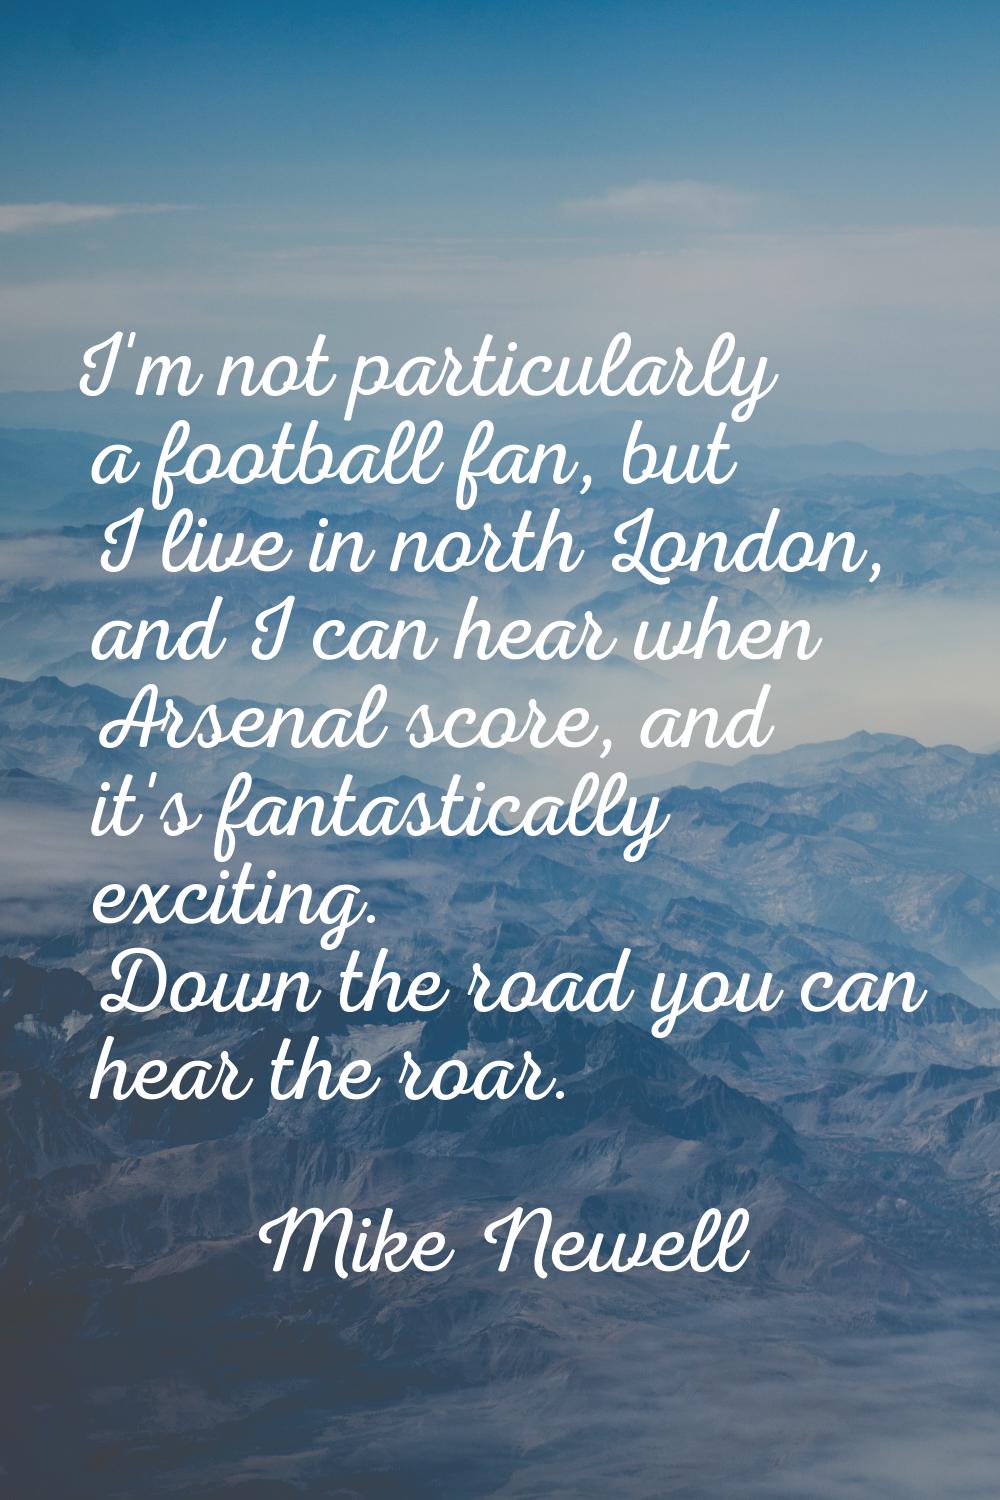 I'm not particularly a football fan, but I live in north London, and I can hear when Arsenal score,